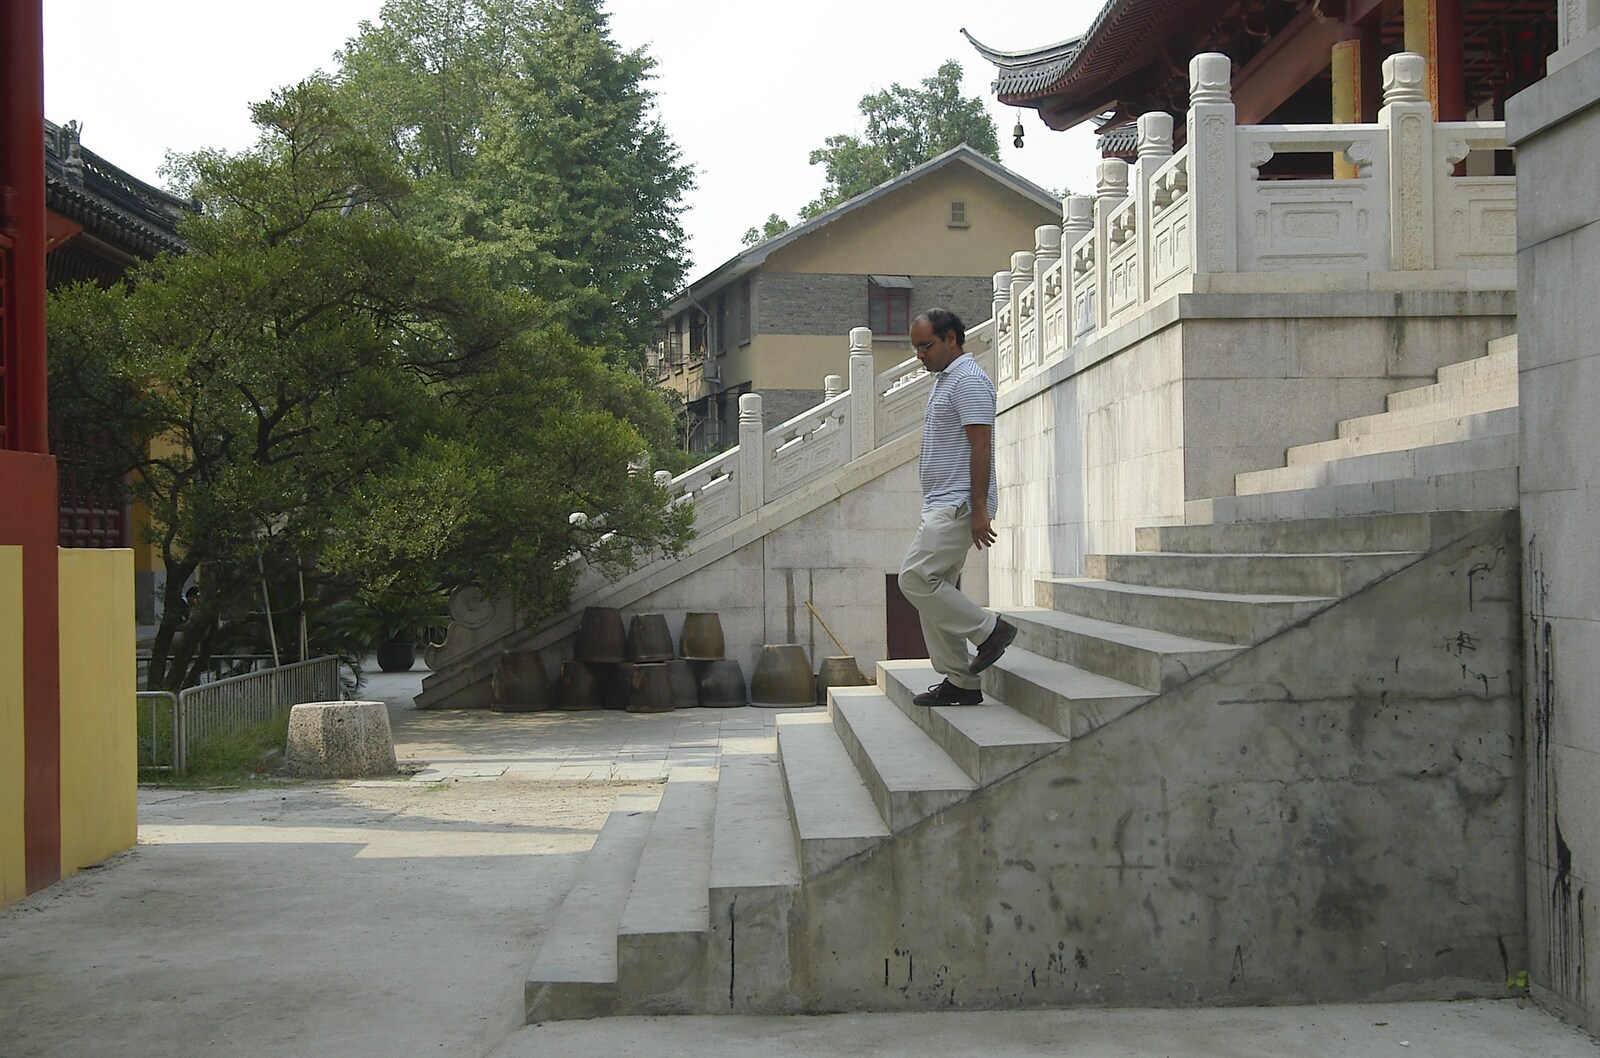 Asish on some steps from A Few Days in Nanjing, Jiangsu Province, China - 7th October 2006